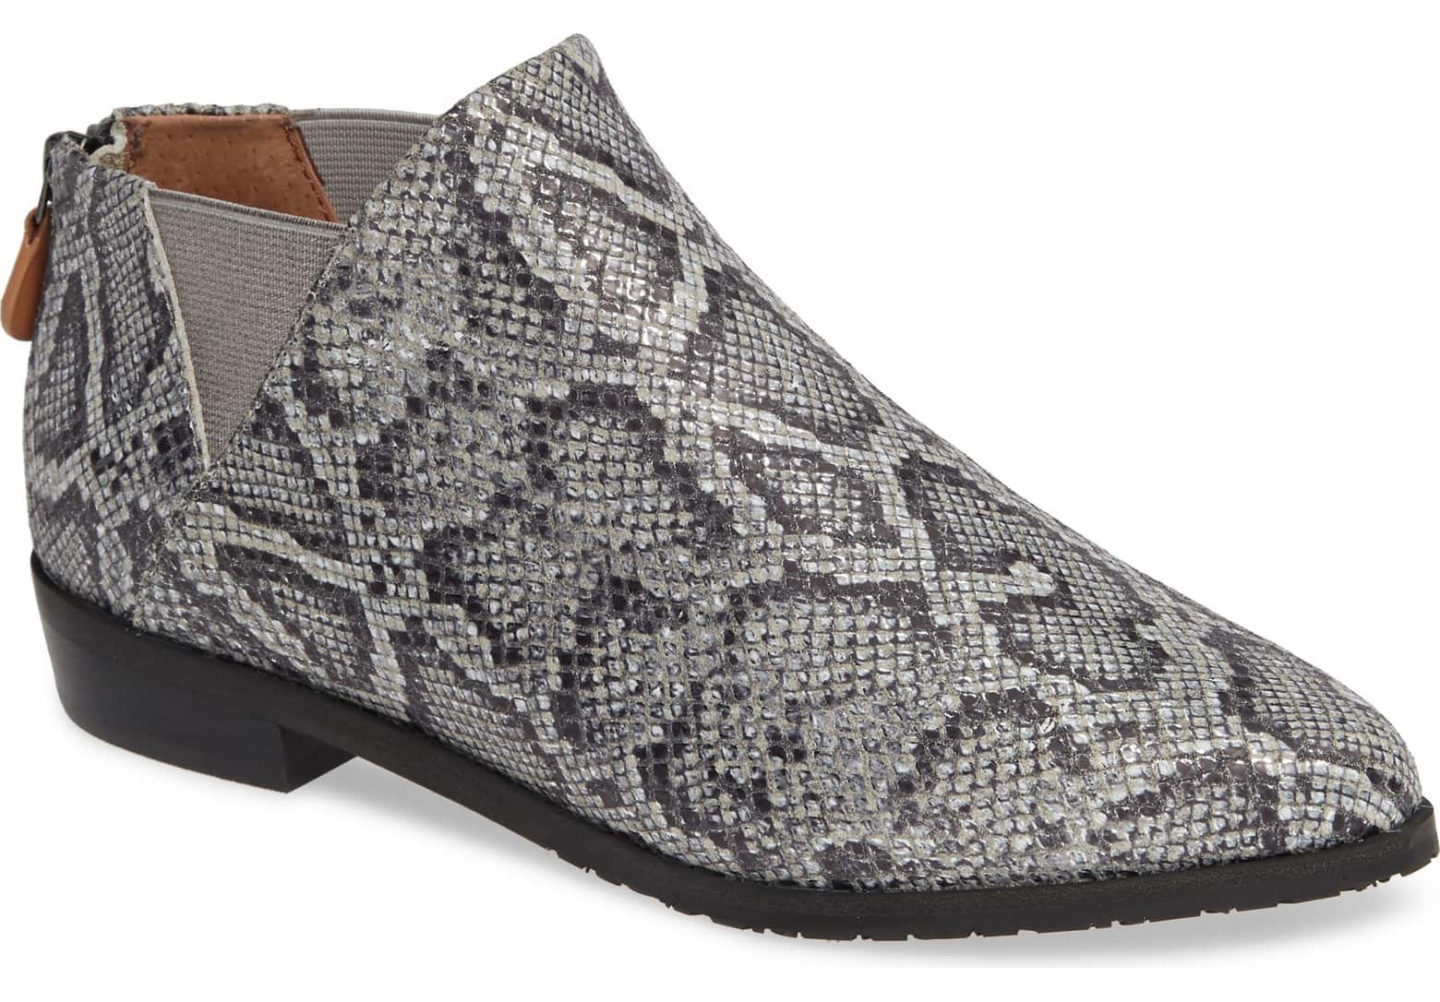 Snake skin ankle boots